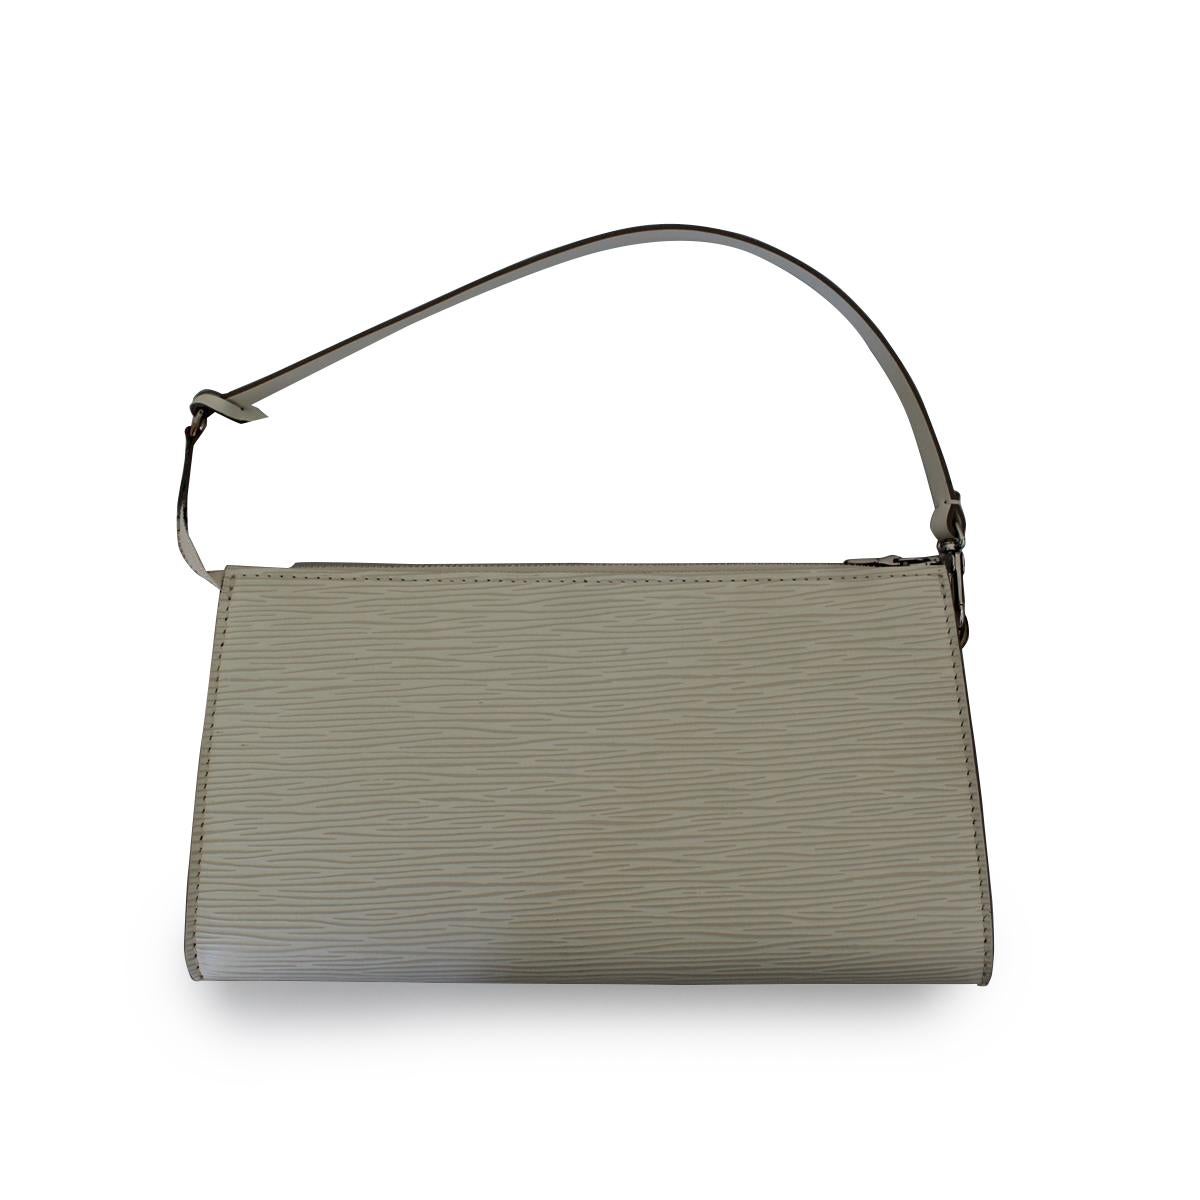 Very chic pochette by LV
Leather
Epi
White color
Zipped
Cm 24 x 13 (9.44 x 5.11 inches)
With dustbag
Worldwide express shipping included in the price !